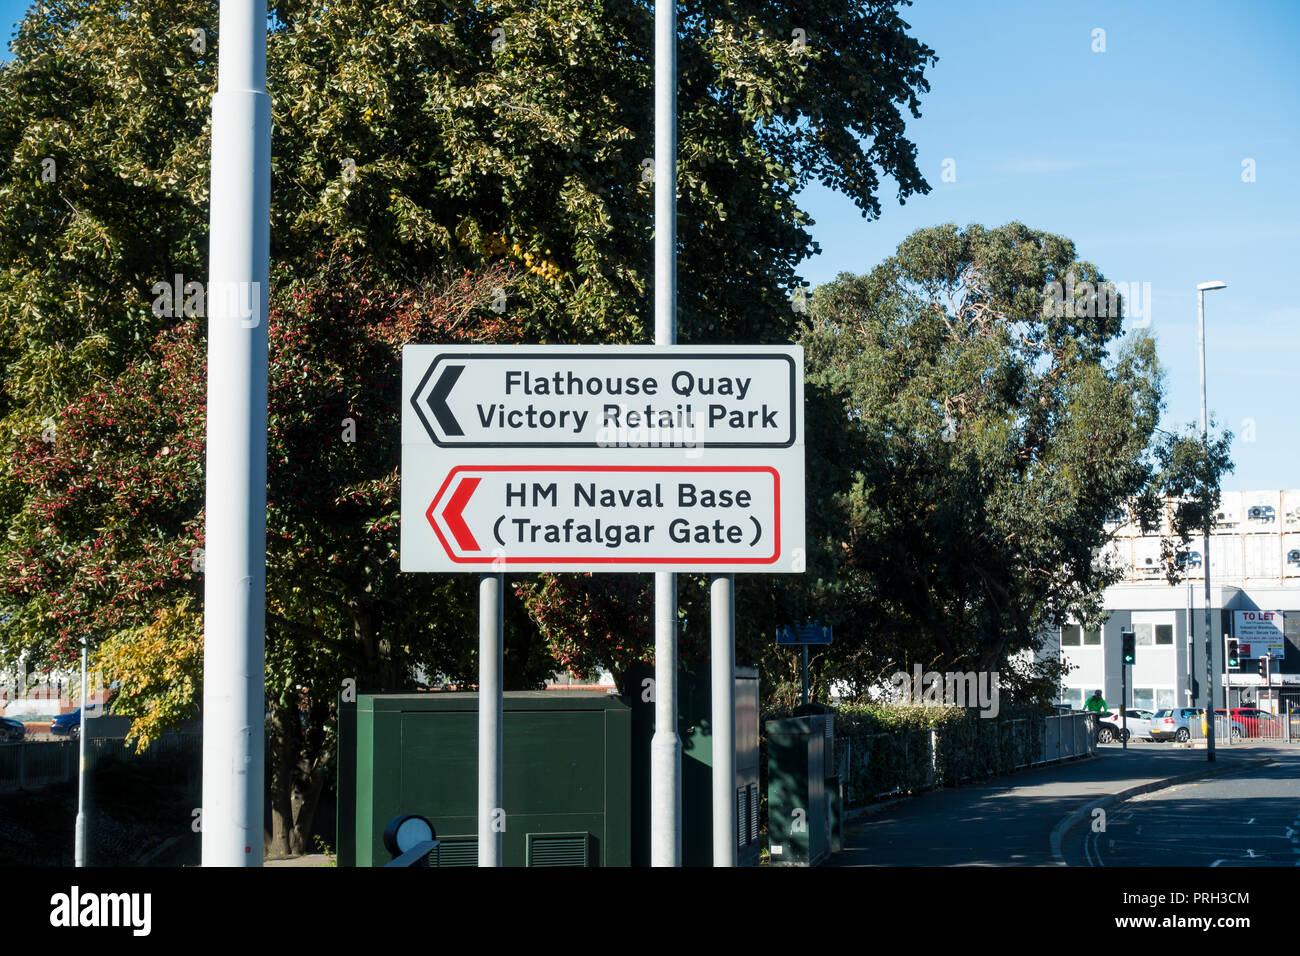 Sign in Portsmouth for HM Naval Base & Flathouse Quay Victory Retail Park,  England, UK Stock Photo - Alamy